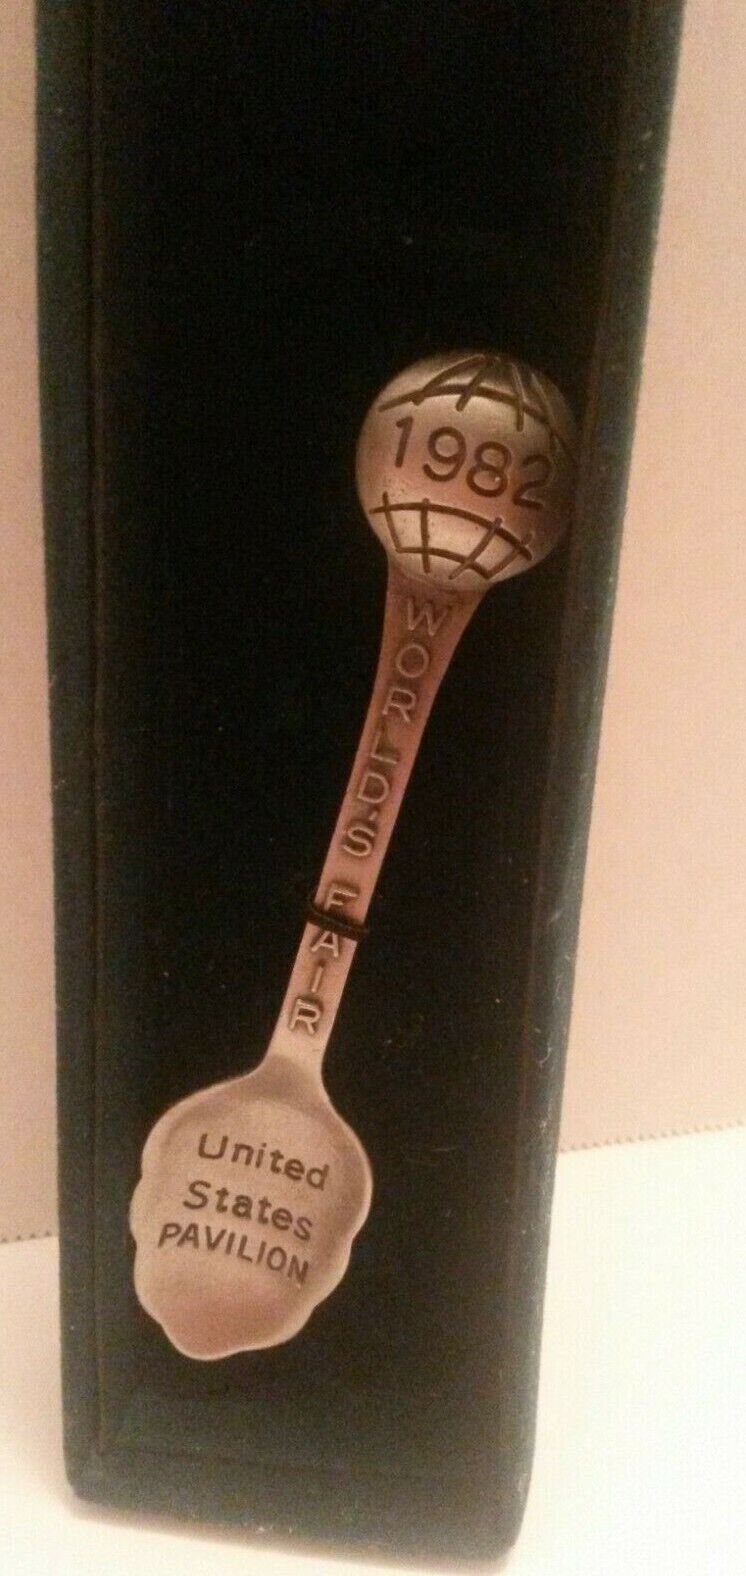 Pewter Spoon 1982 World's Fair Us Pavilion 3 1/2 Inches New In Box Souvenir